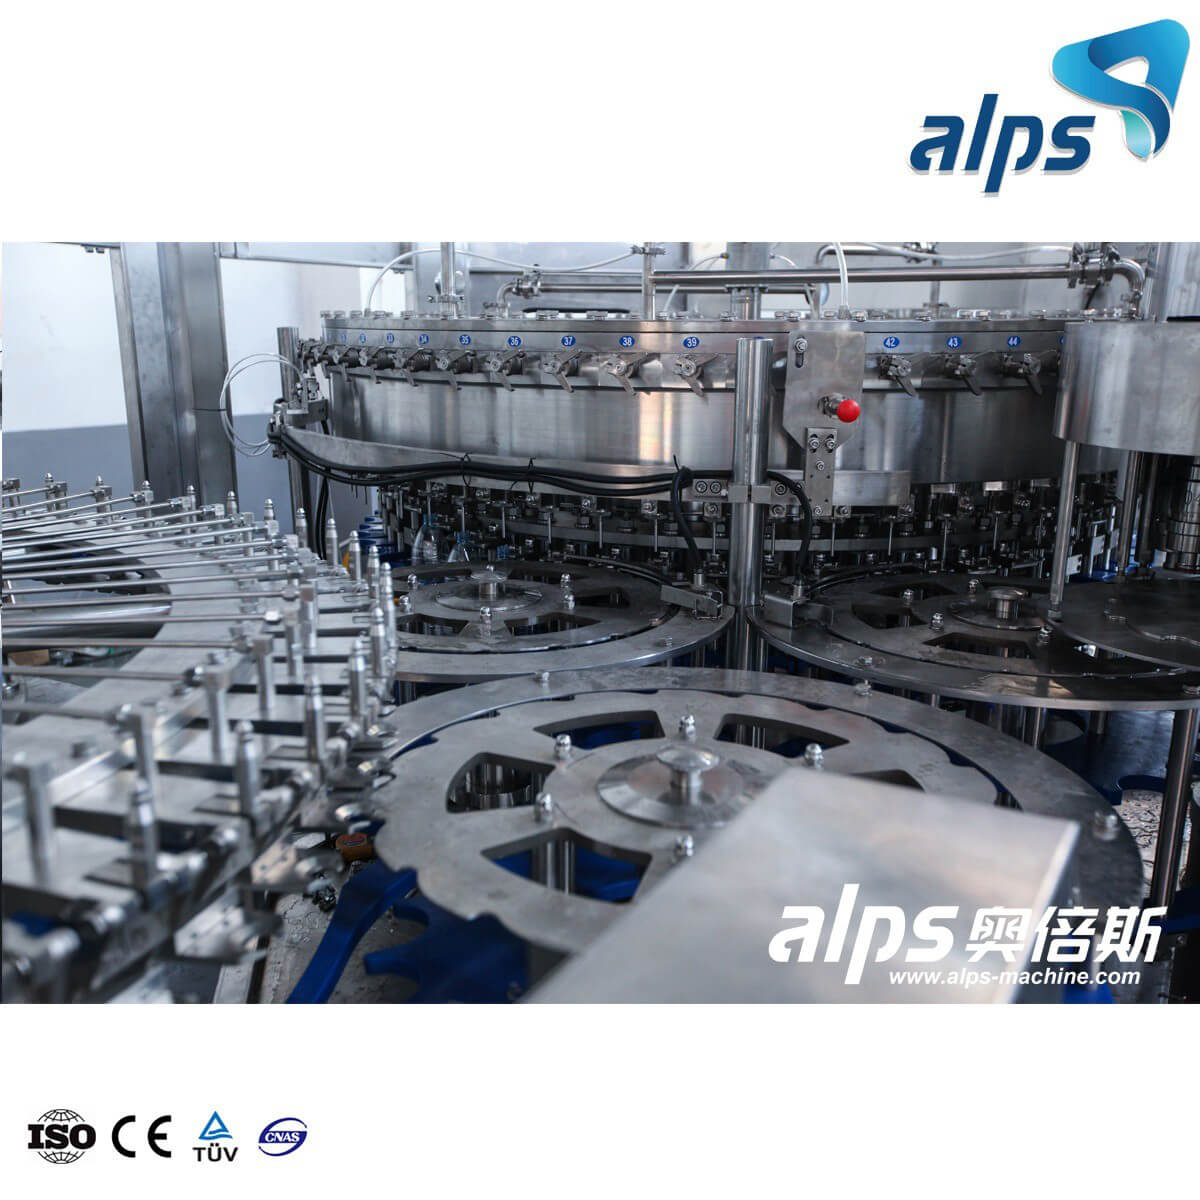 10000BPH Automatic Carbonated Drink Filling Machine (Model : DCGF32-32-10)